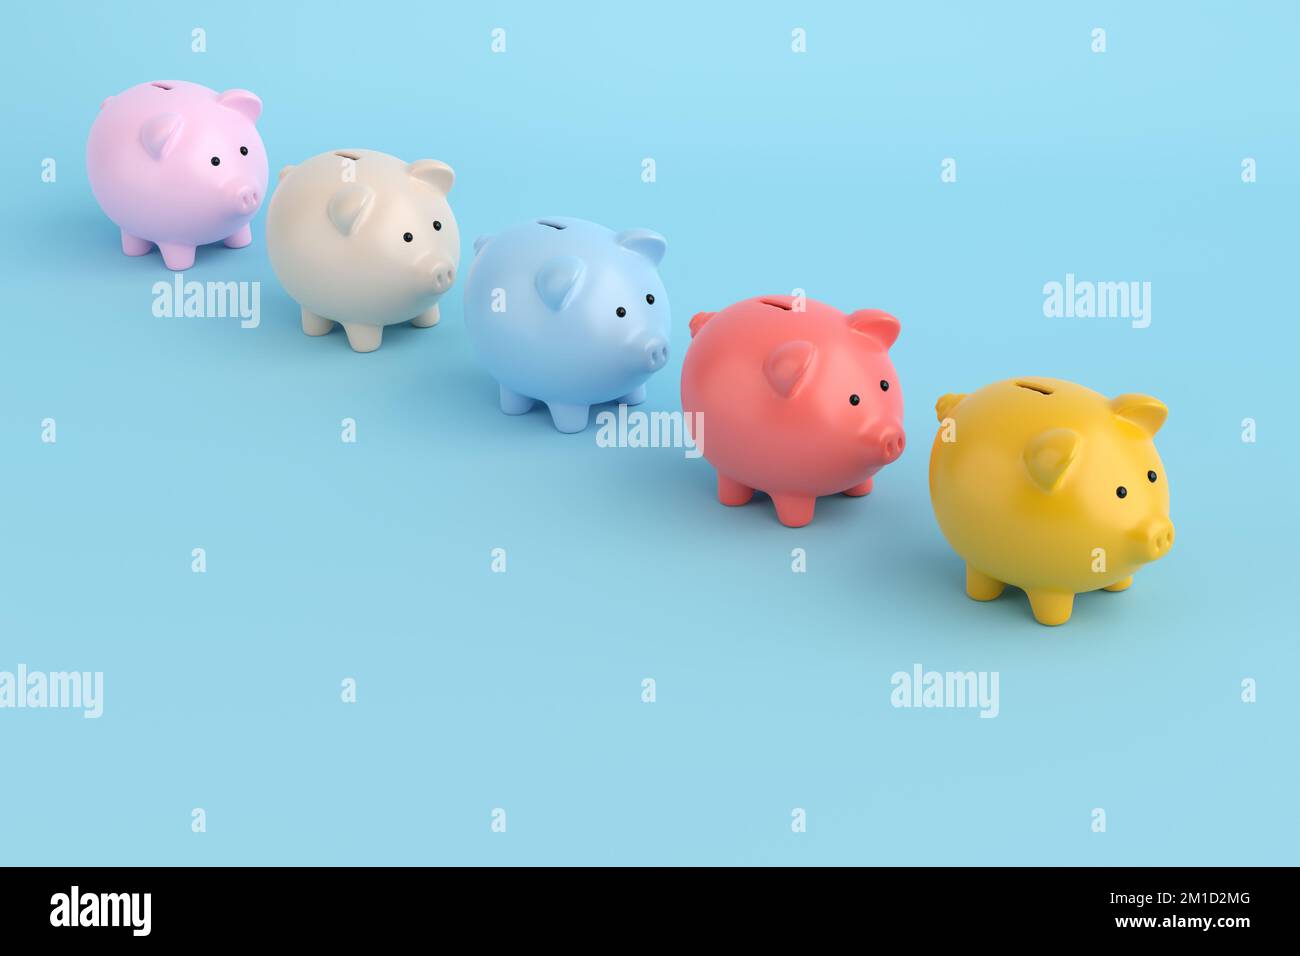 Pastel colored Piggy Banks in a row on blue background. Saving money, financial planning and leadership concepts. 3D rendering. Stock Photo